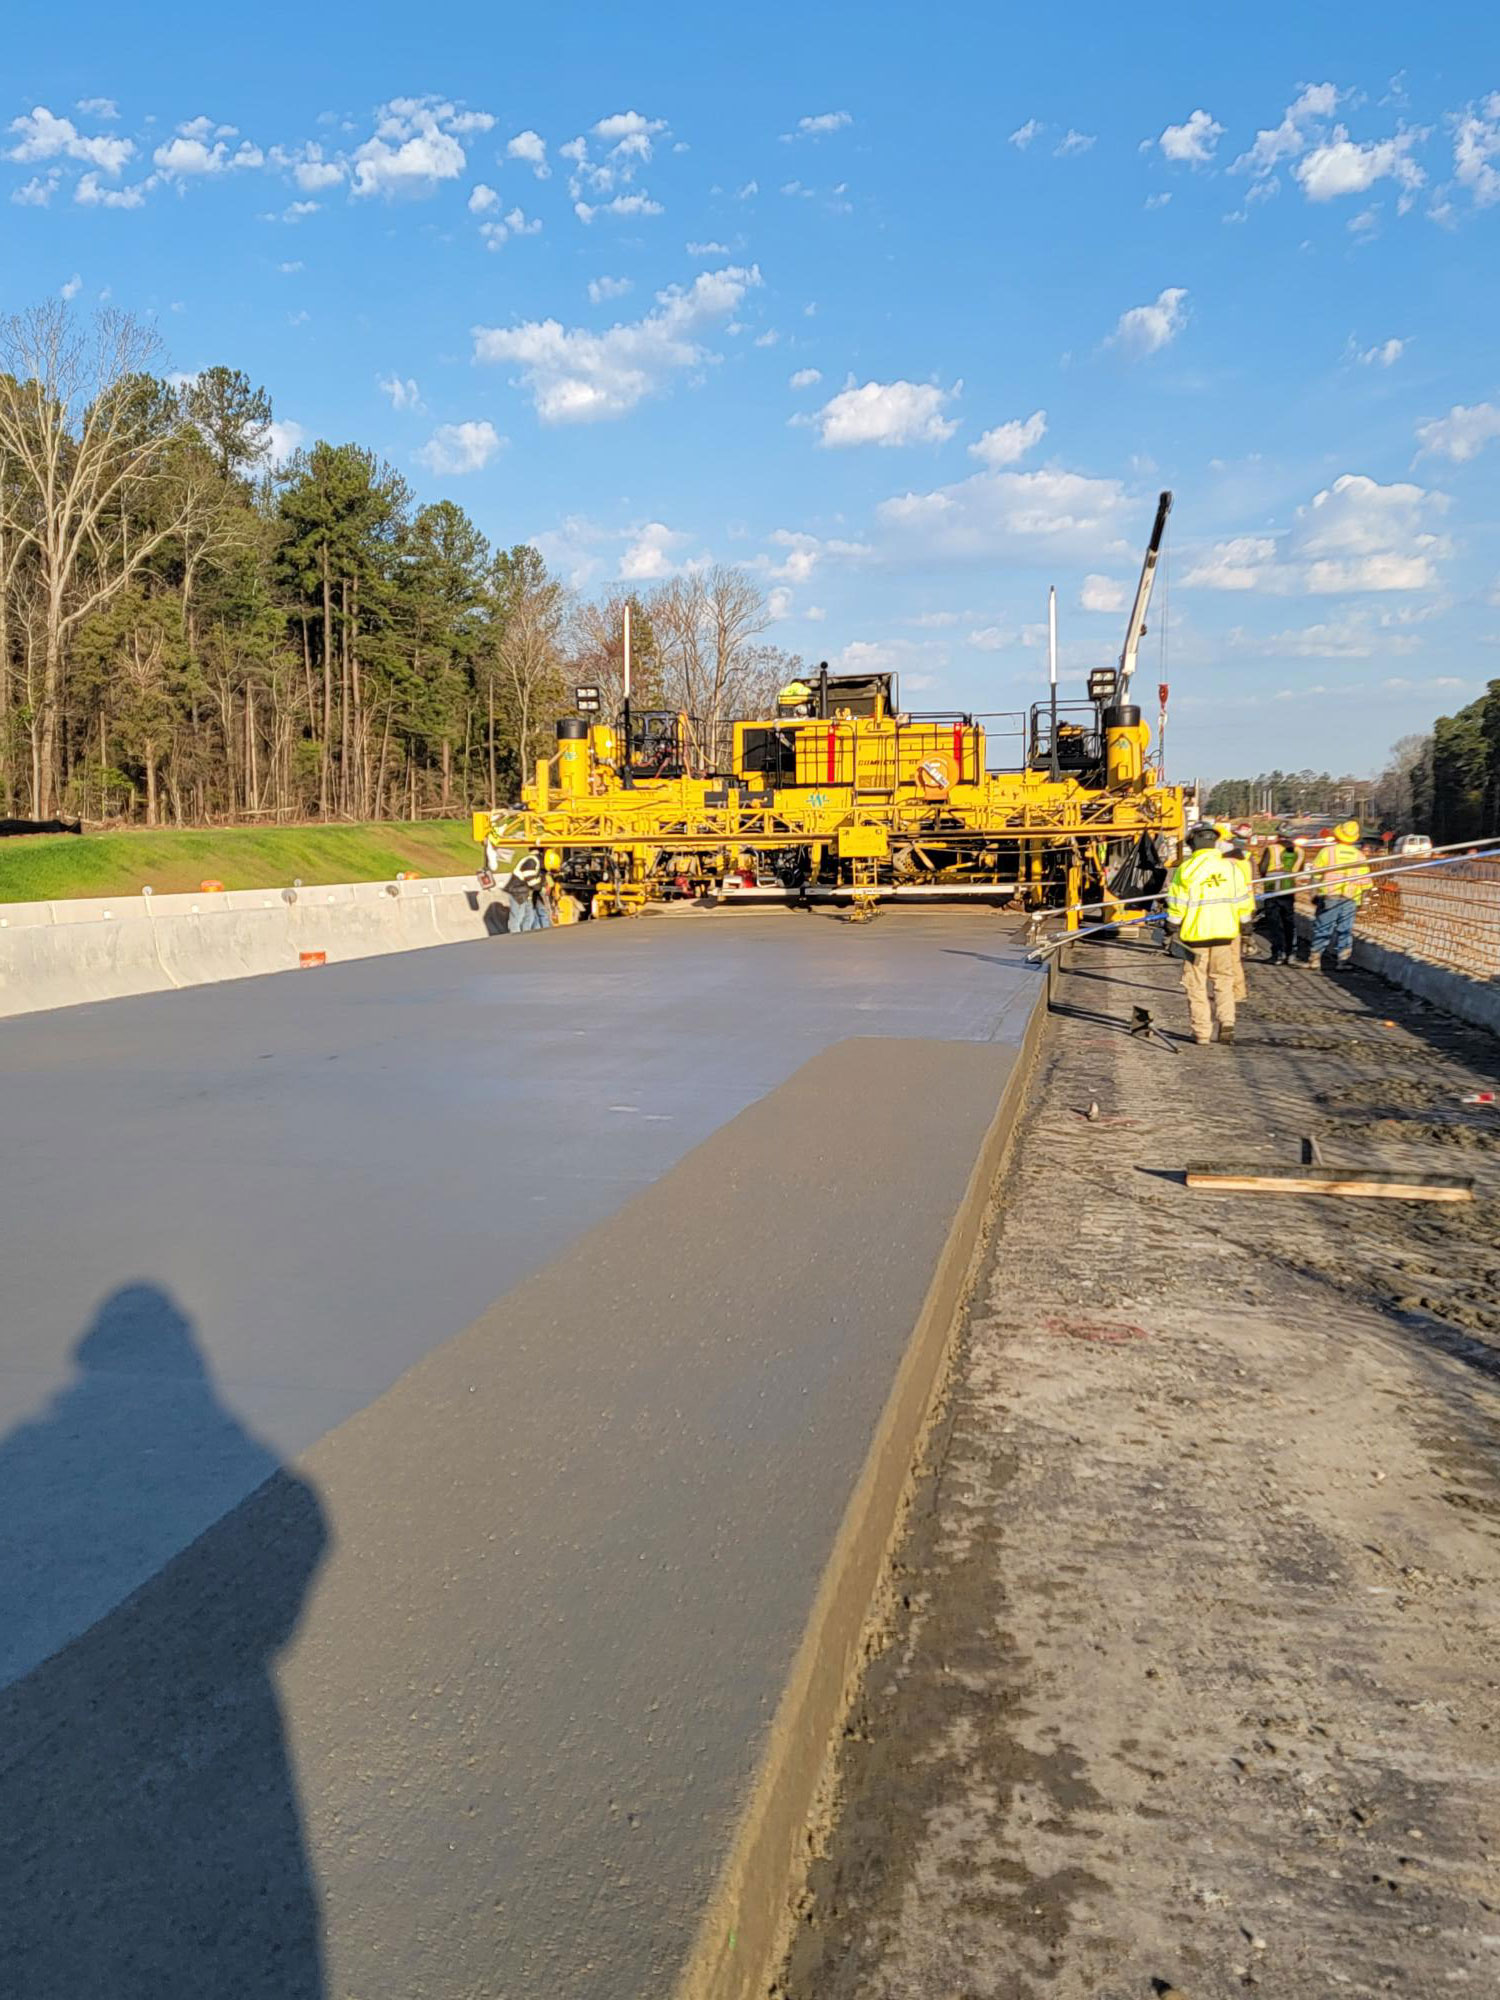 The contractor utilizes a dual lane paver to pave two lanes at a time.  On a good day, over 2,000 CY of concrete can be placed.  That’s more than 200 dump truck loads!